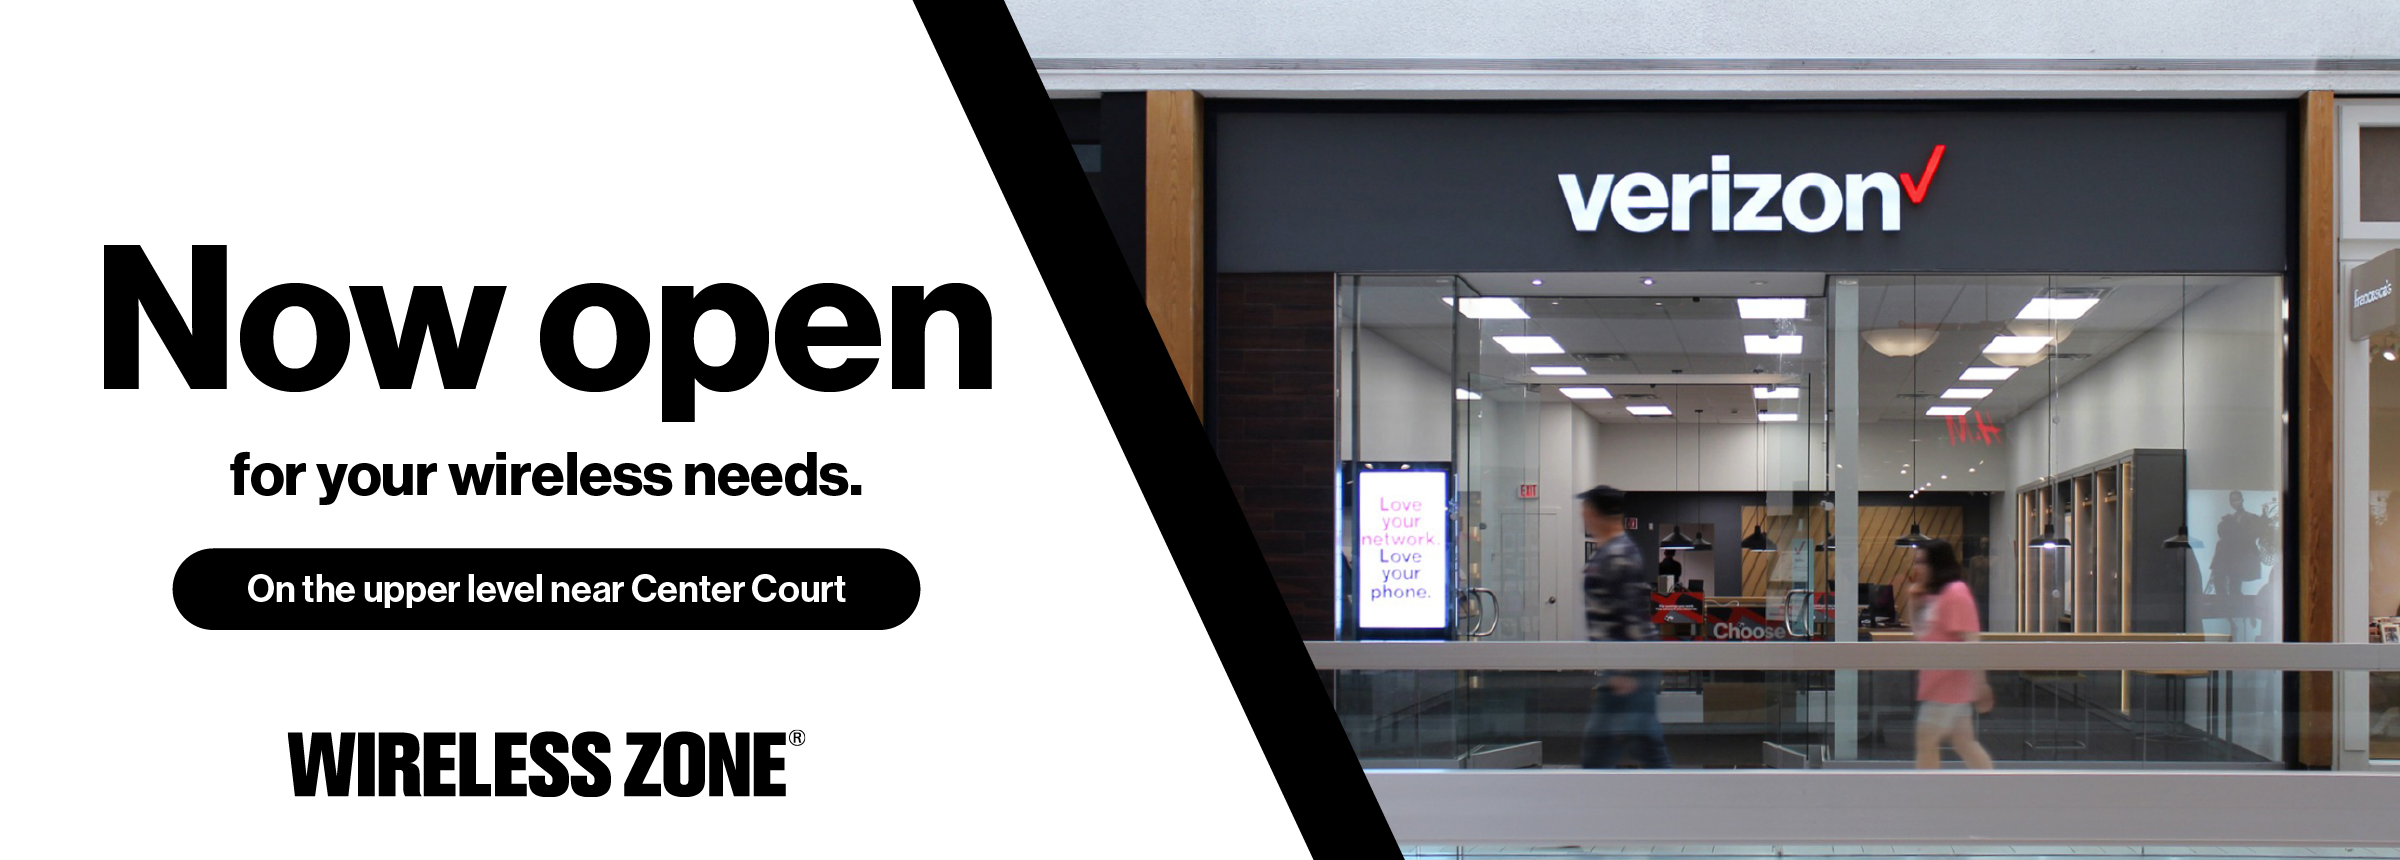 Verizon is now open on the upper level near Center Court.